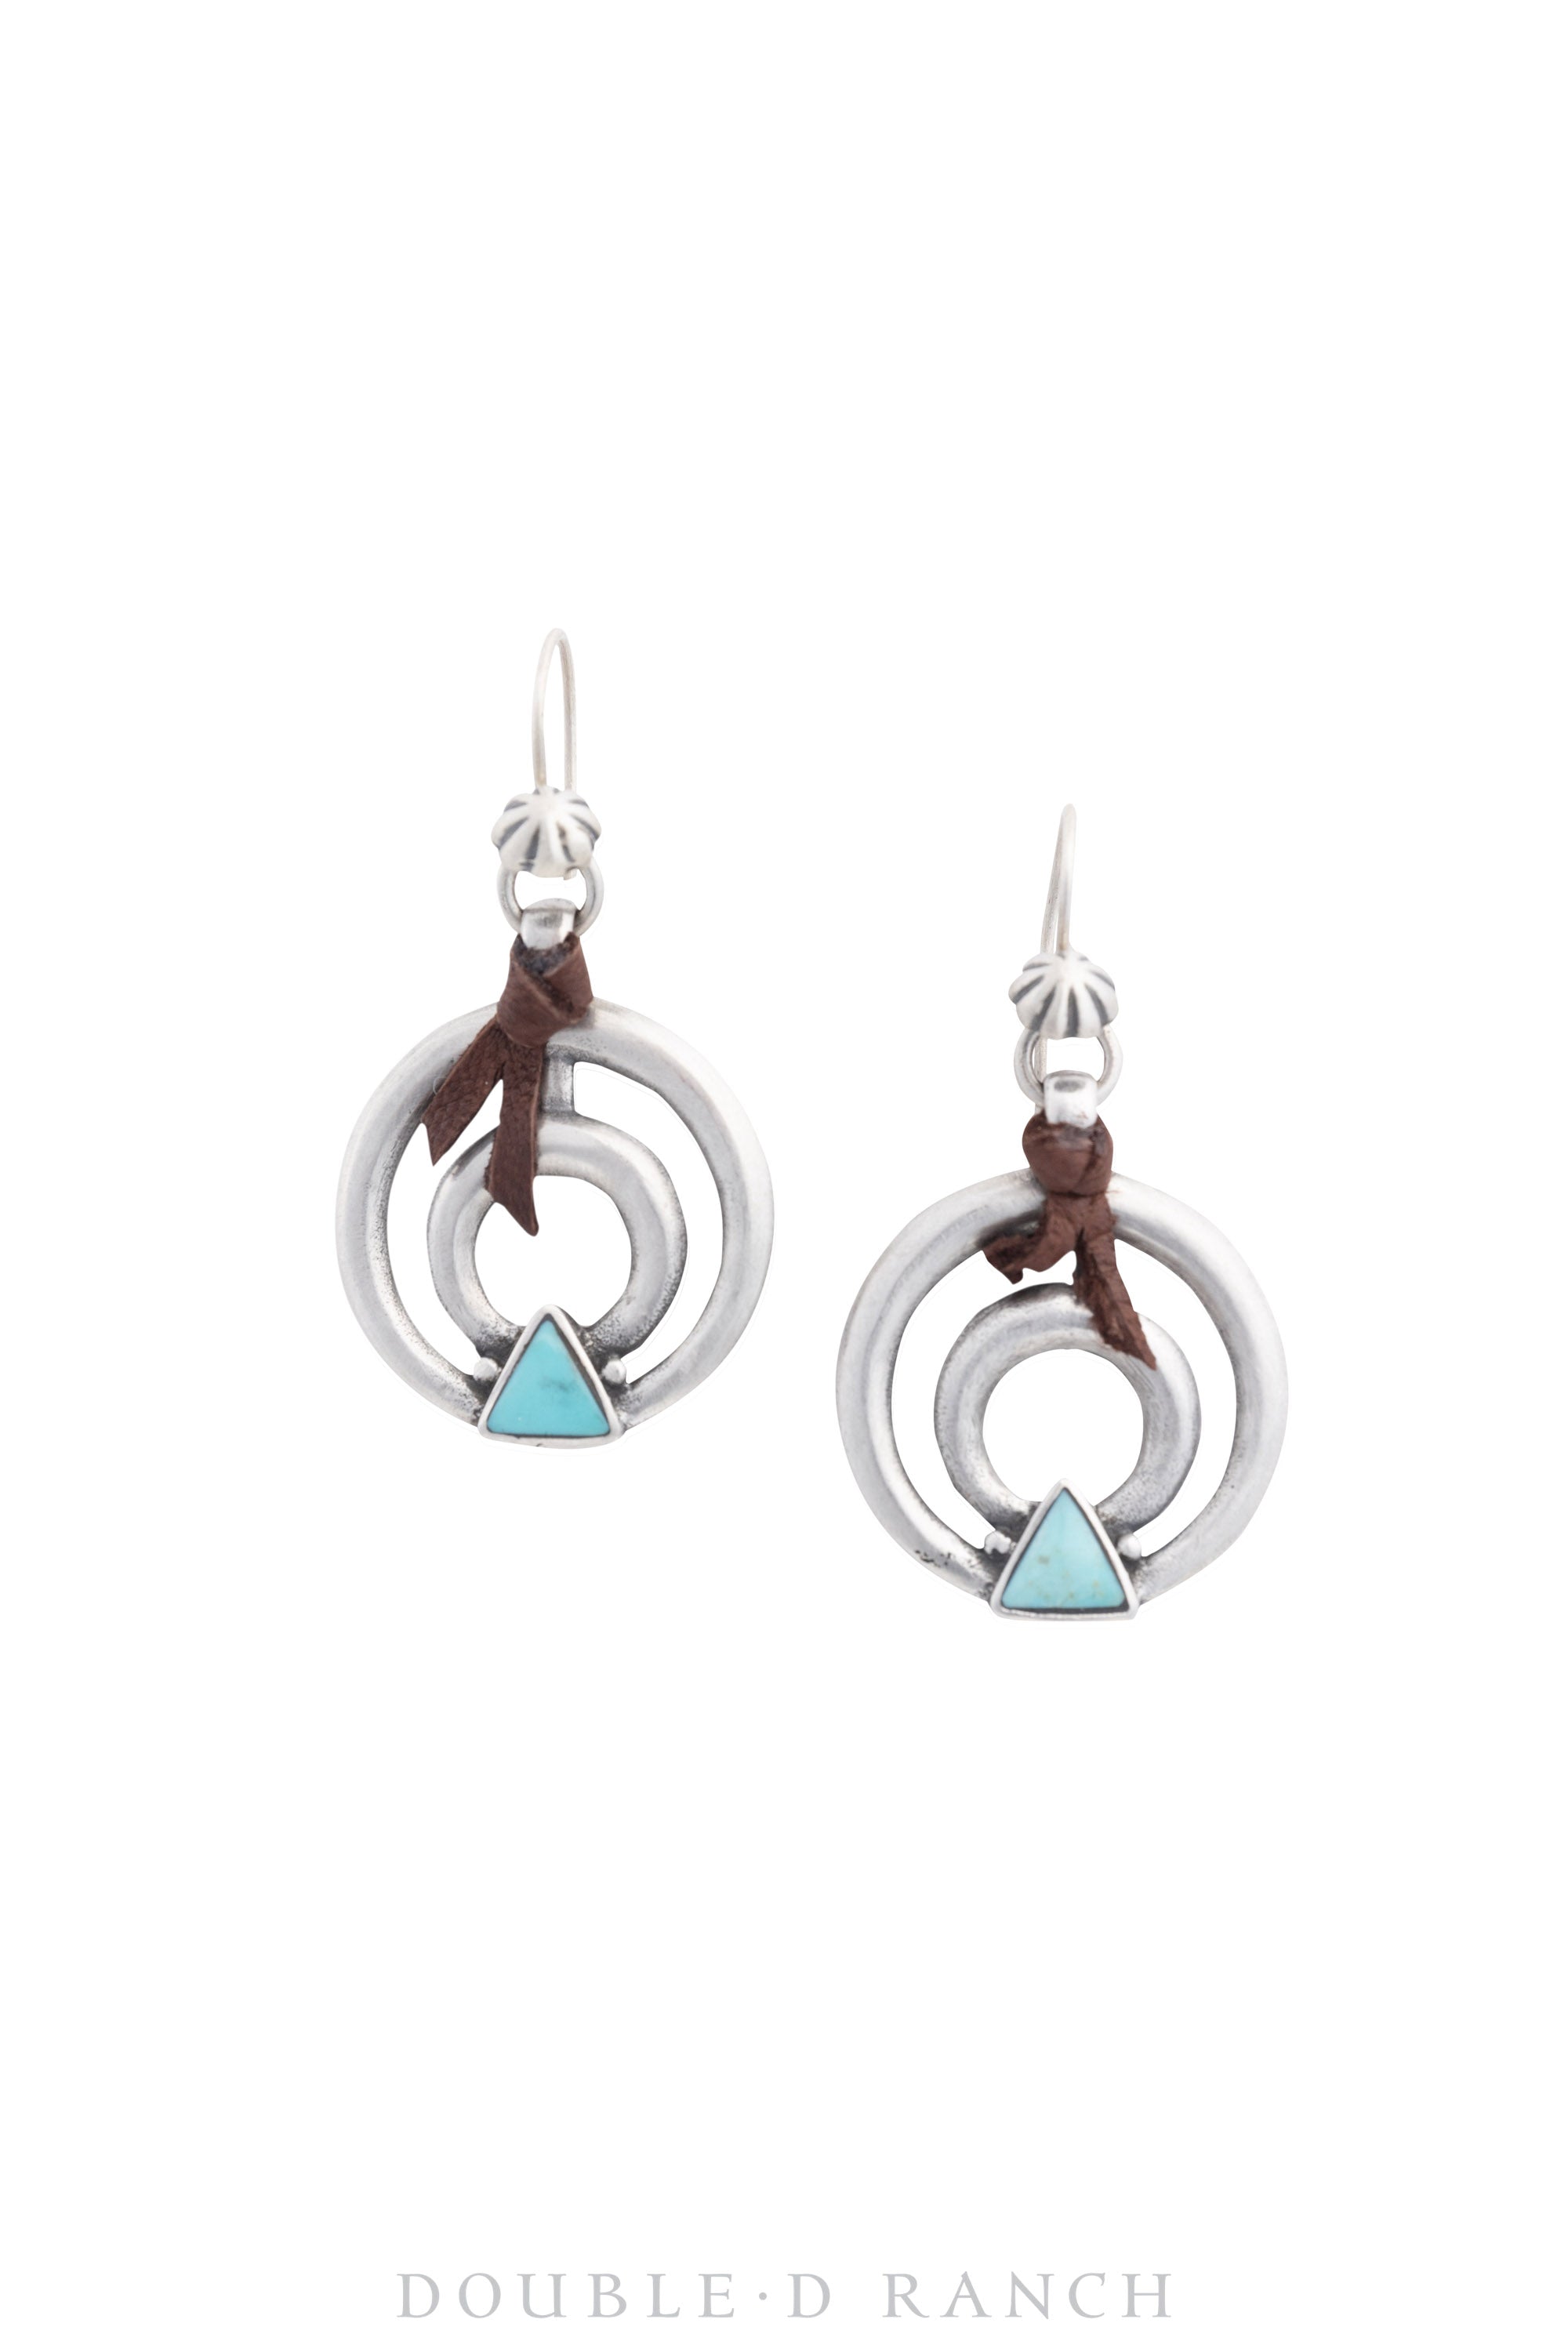 Earrings, Drops, Turquoise, Naja, Contemporary, 1515